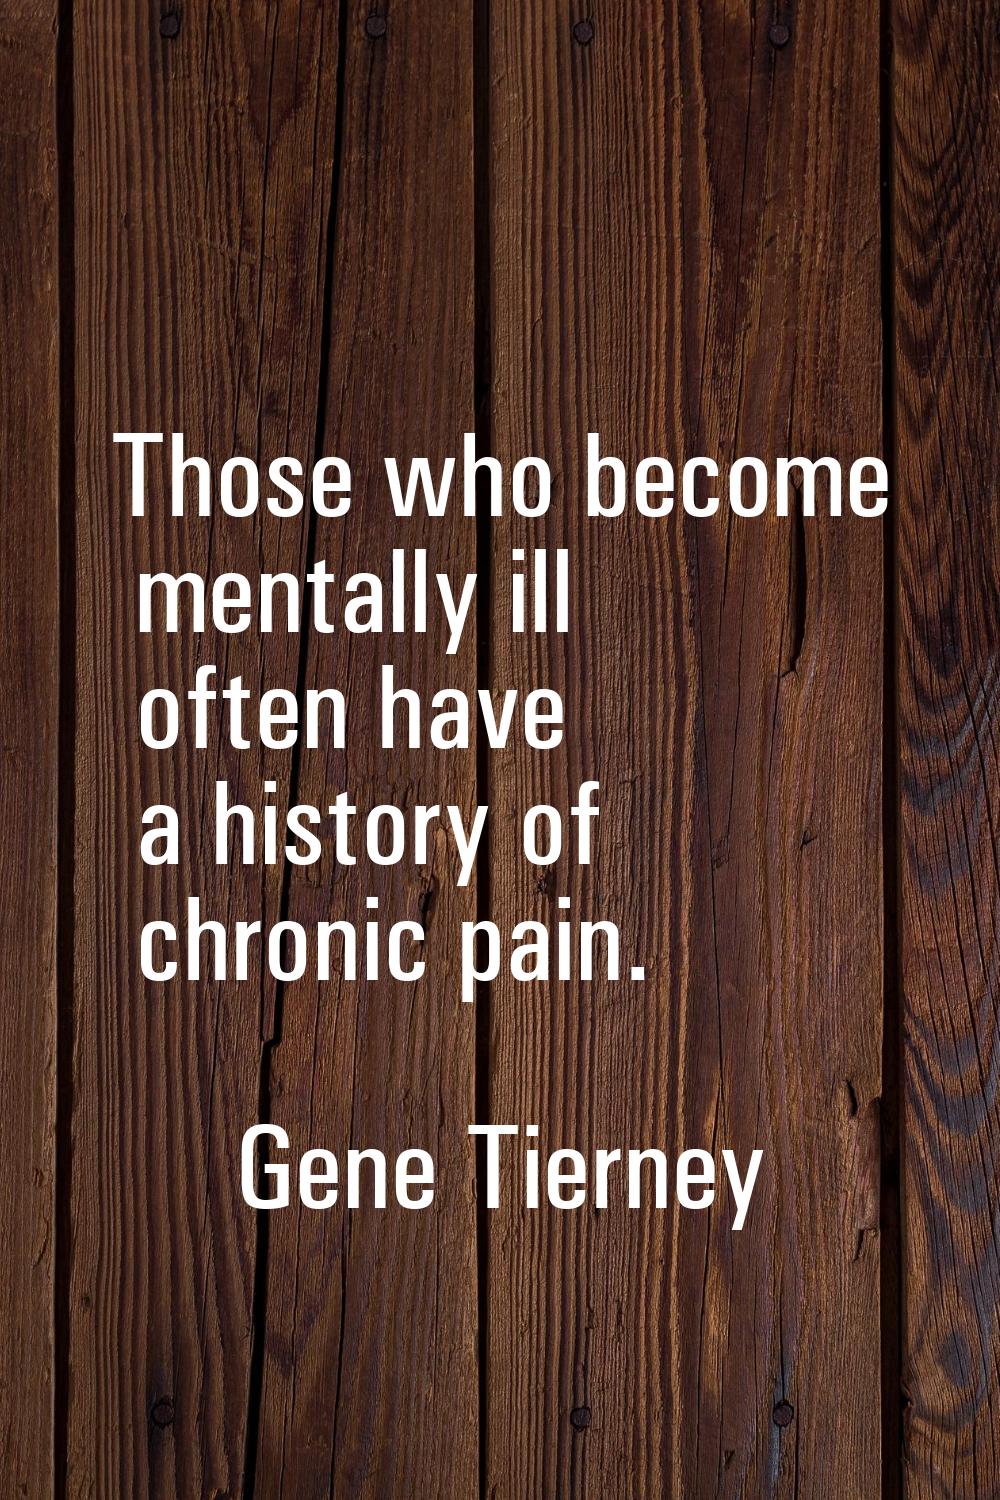 Those who become mentally ill often have a history of chronic pain.